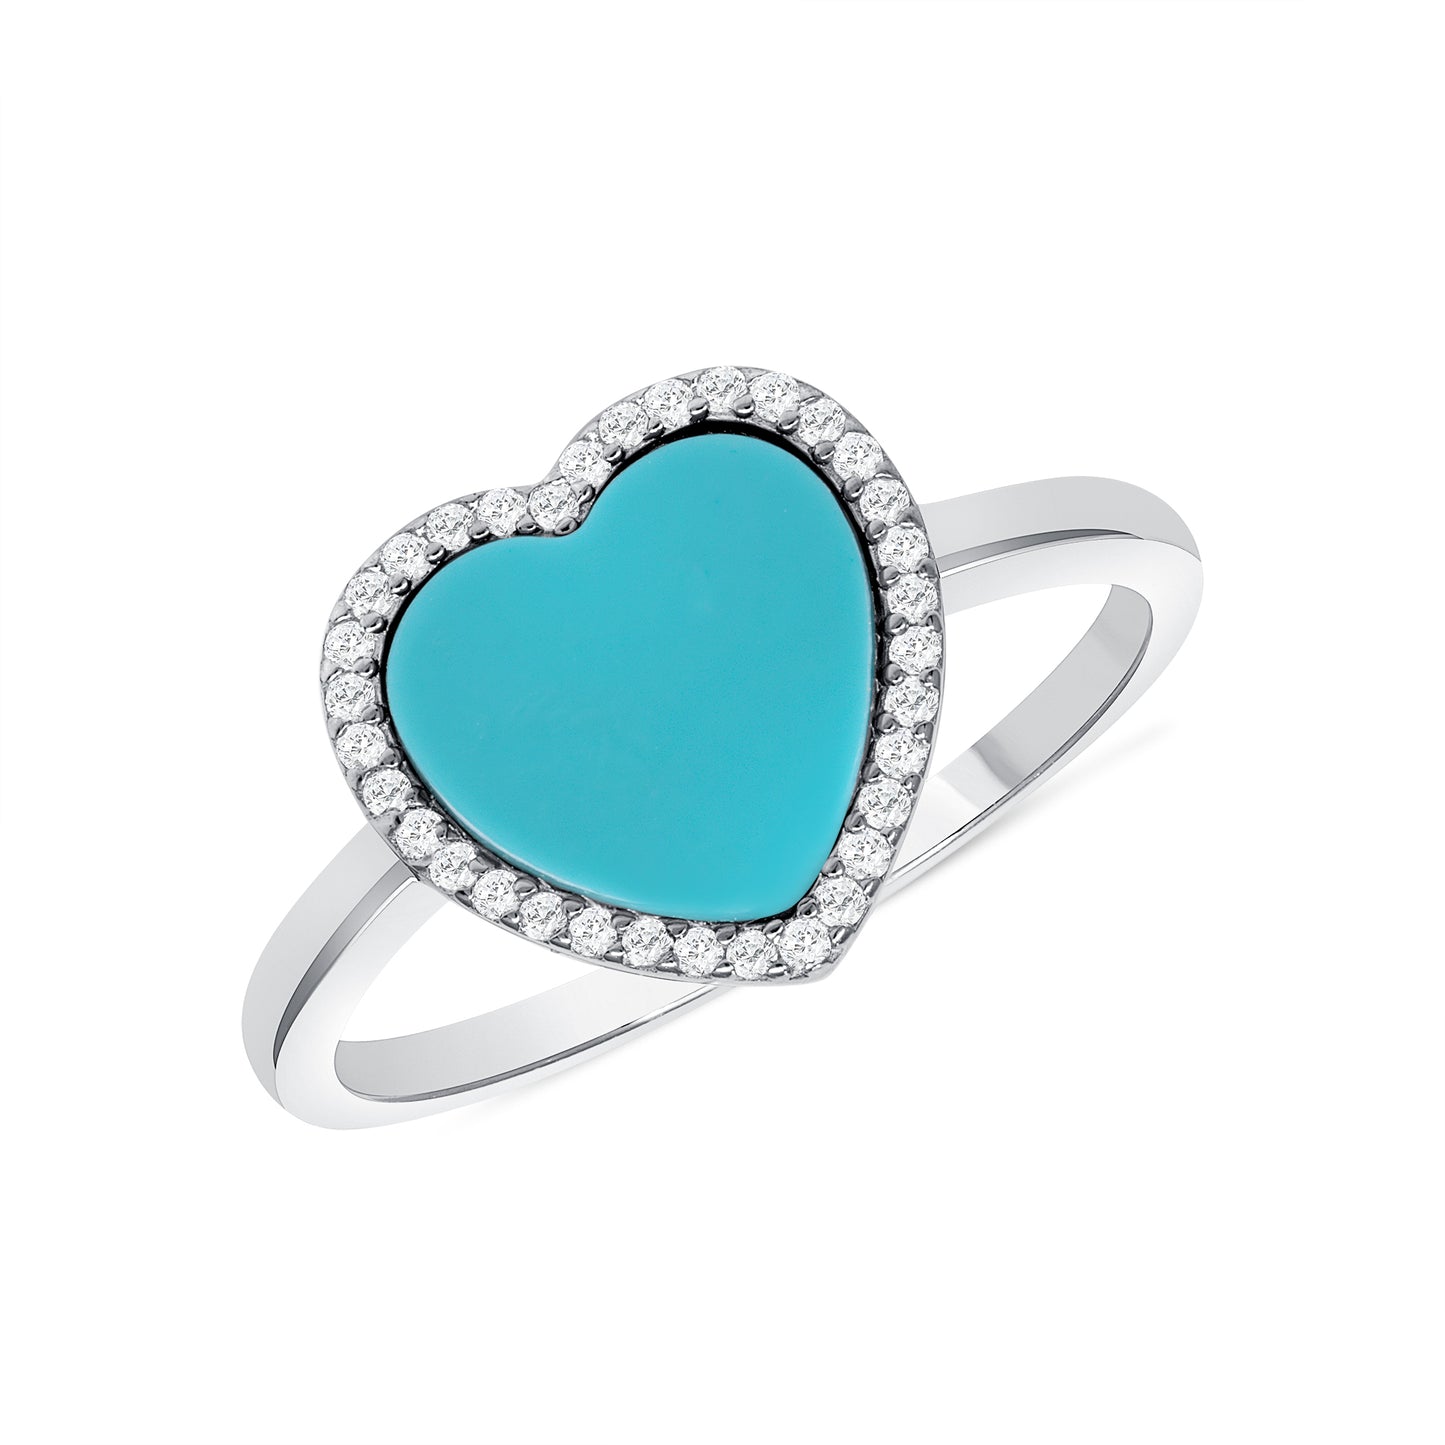 Silver 925 Pave Setting Turquoise Heart Ring. DGR2198TQ